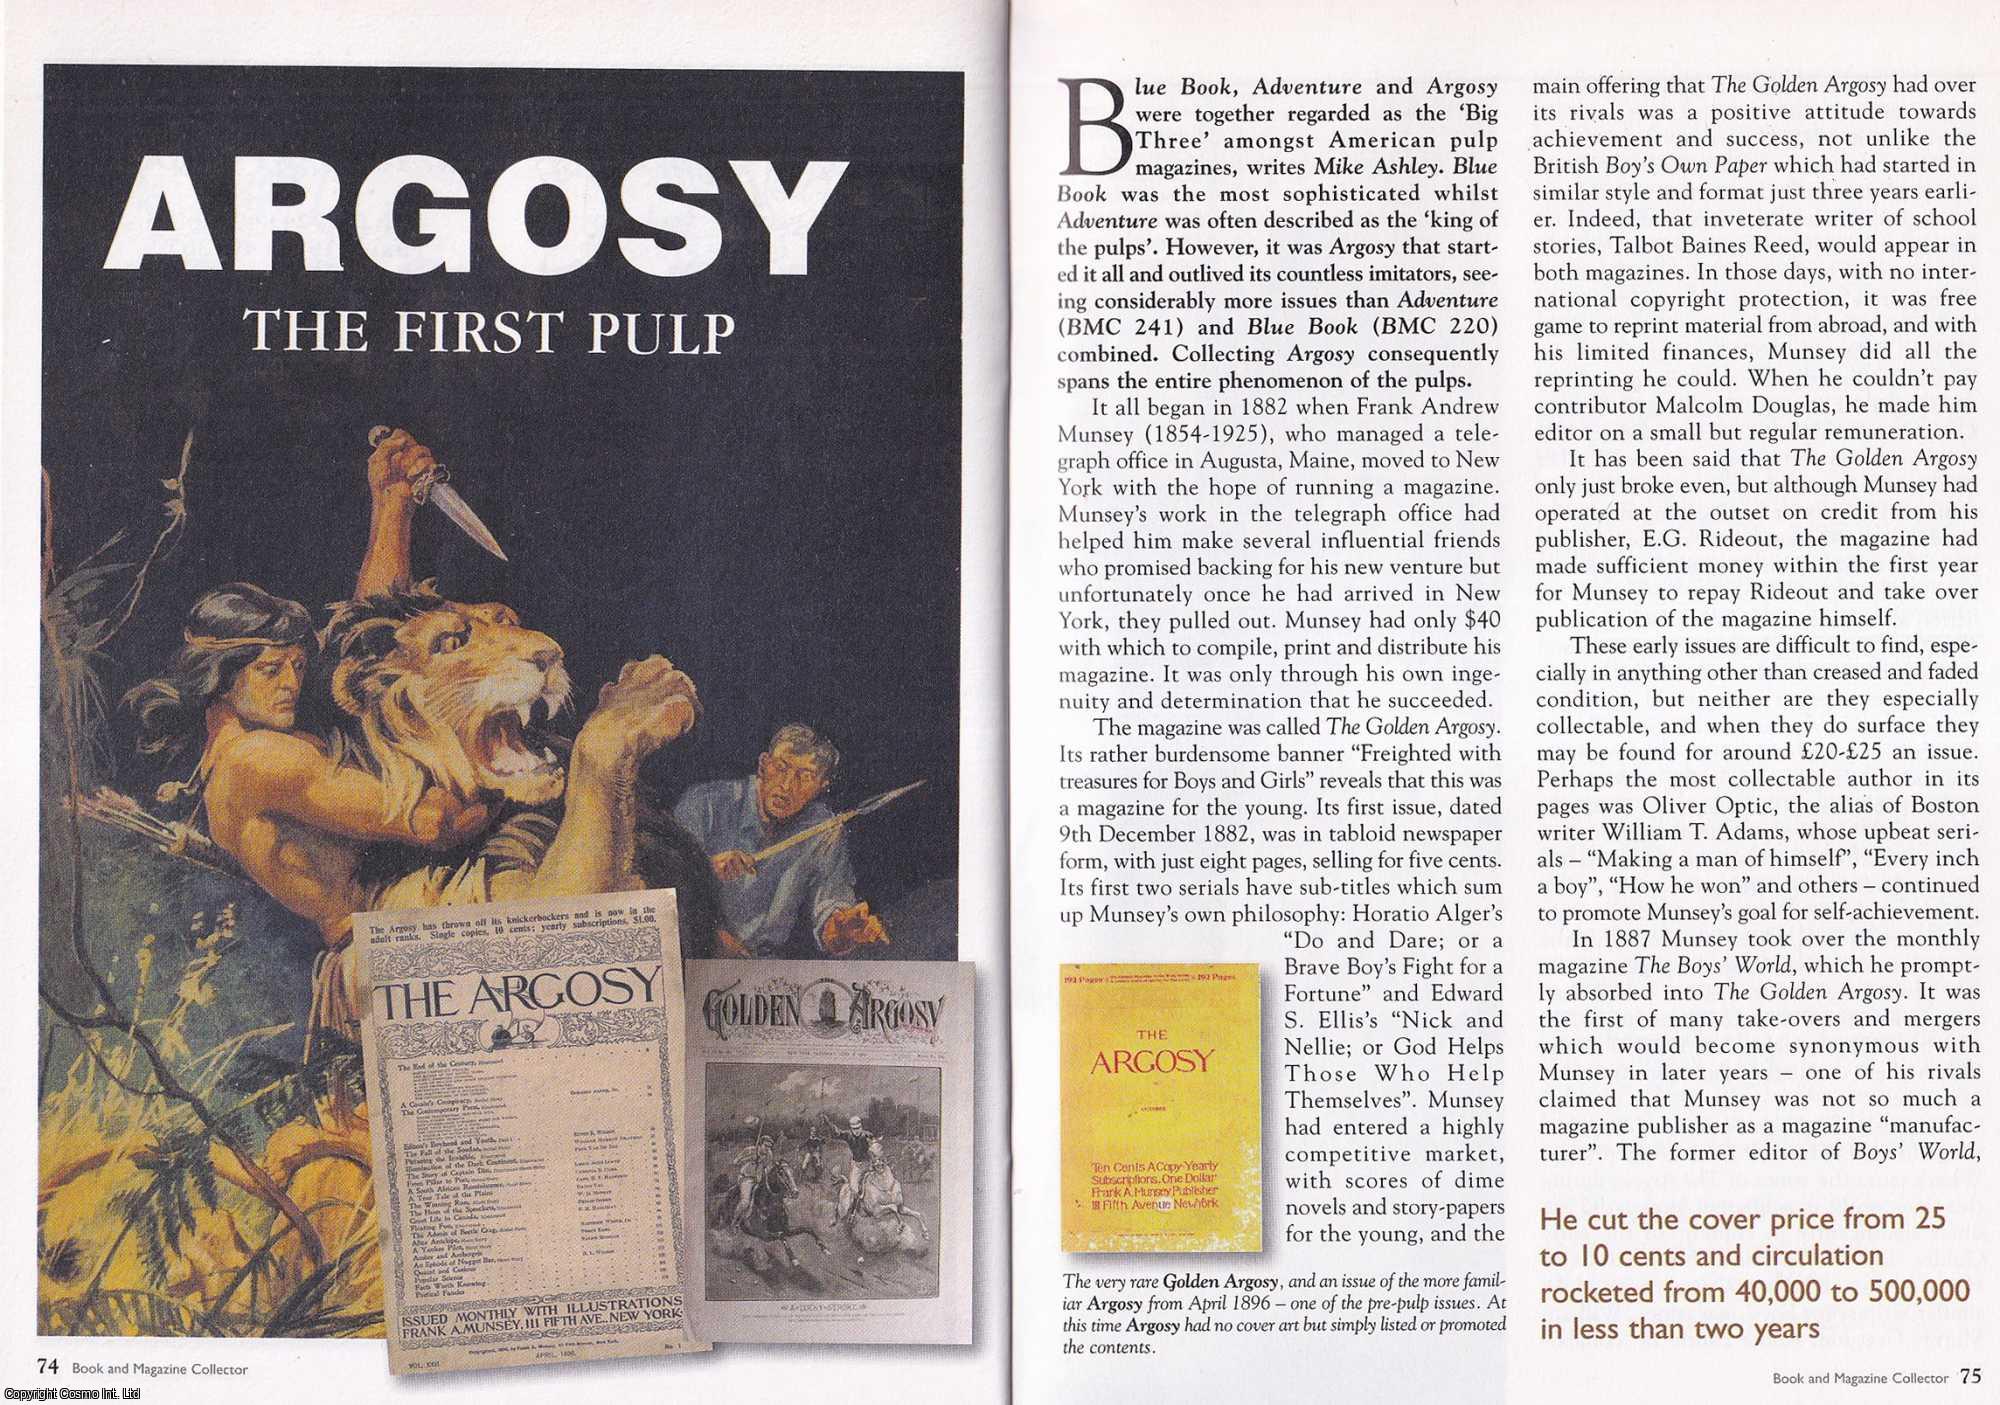 --- - Argosy The First Pulp. This is an original article separated from an issue of The Book & Magazine Collector publication.